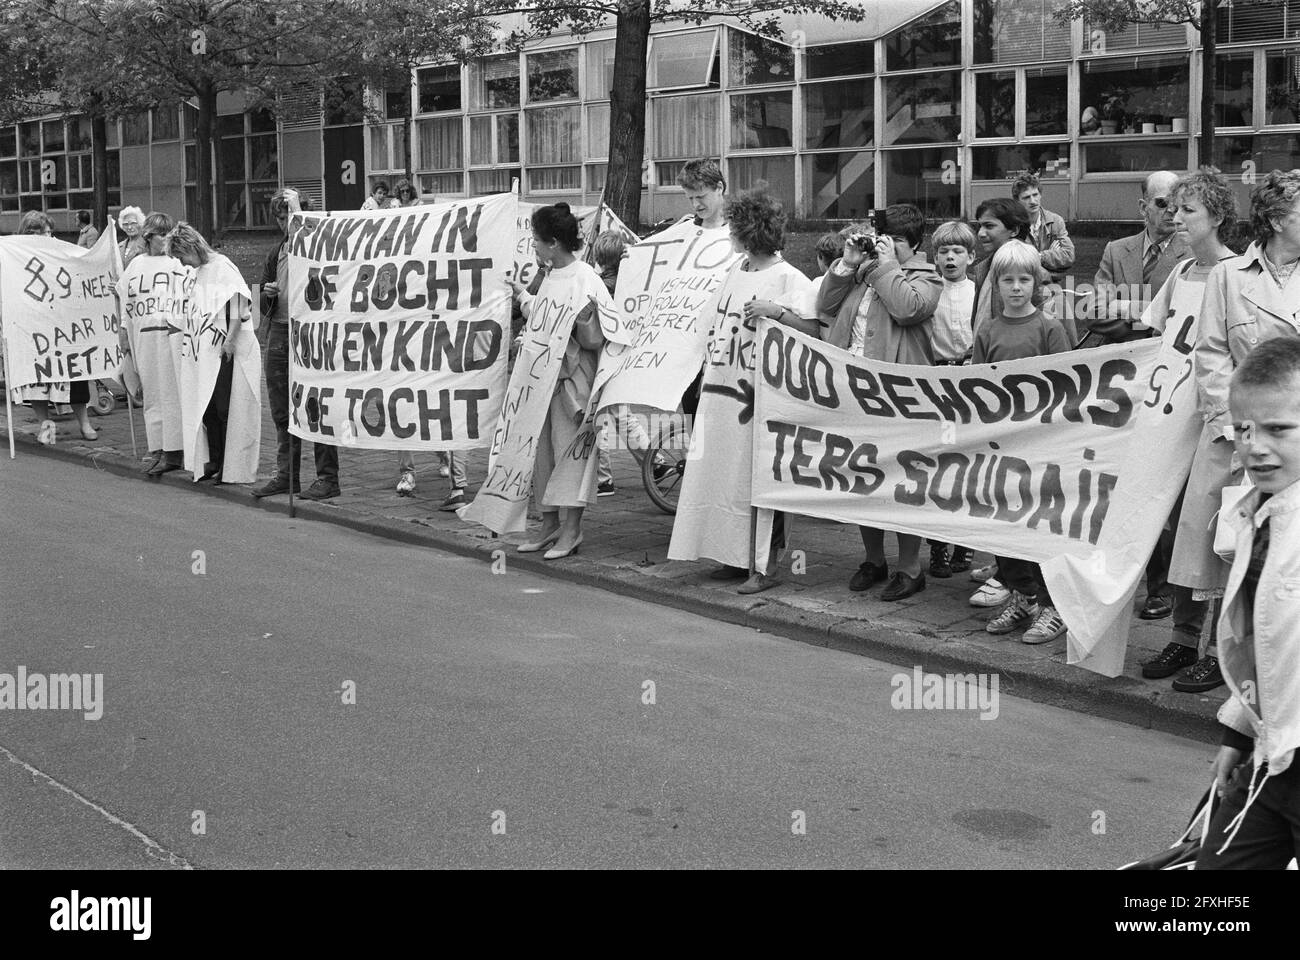 Women of FIOM shelters for unmarried mothers demonstrate at the opening of a home for the unhoused of the HVO (Help for the Unhoused) in Amsterdam with a banner Brinkman in the corner, woman and child at risk, May 31, 1983, demonstrations, budget cuts, banners, women, The Netherlands, 20th century press agency photo, news to remember, documentary, historic photography 1945-1990, visual stories, human history of the Twentieth Century, capturing moments in time Stock Photo